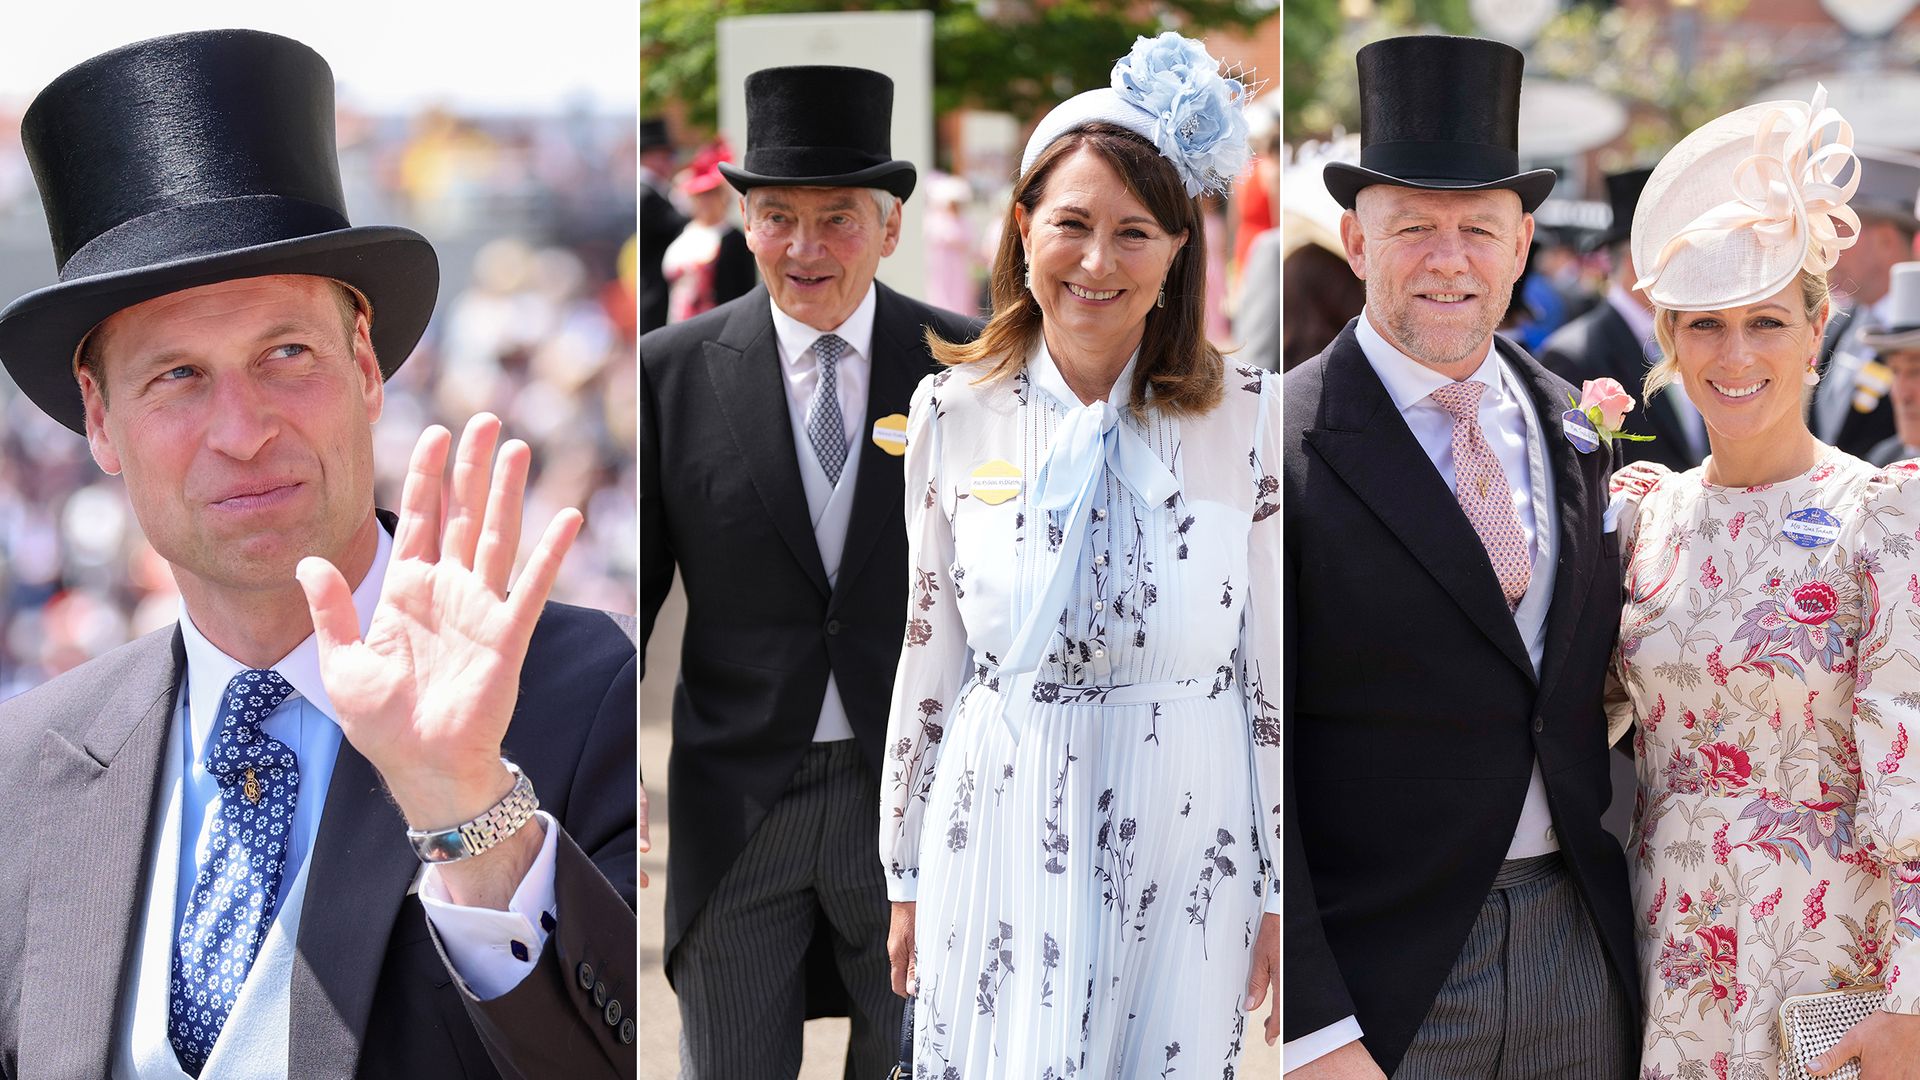 Prince William, Carole and Michael Middleton, Mike and Zara Tindall at Royal Ascot